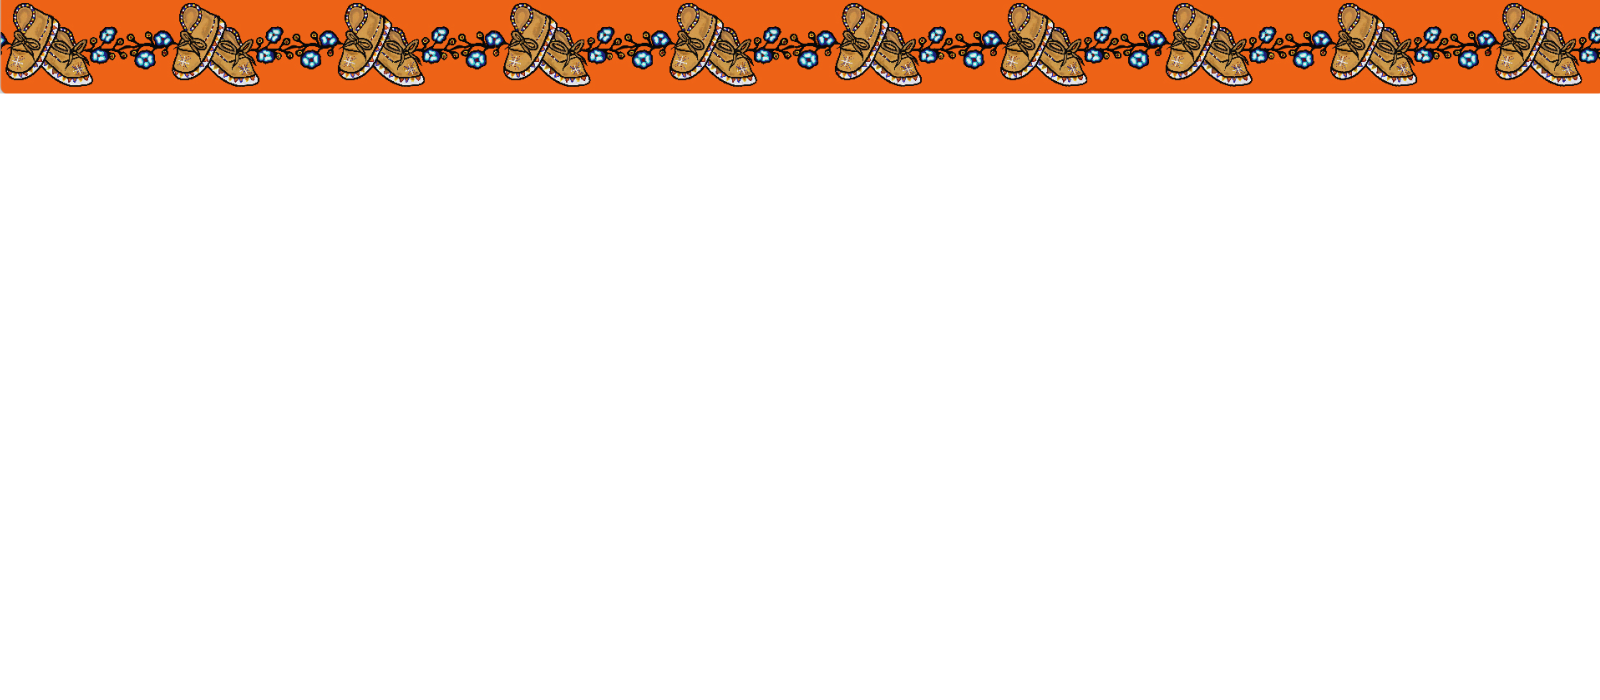 White background with an orange border on top with pairs of moccasins across the top.